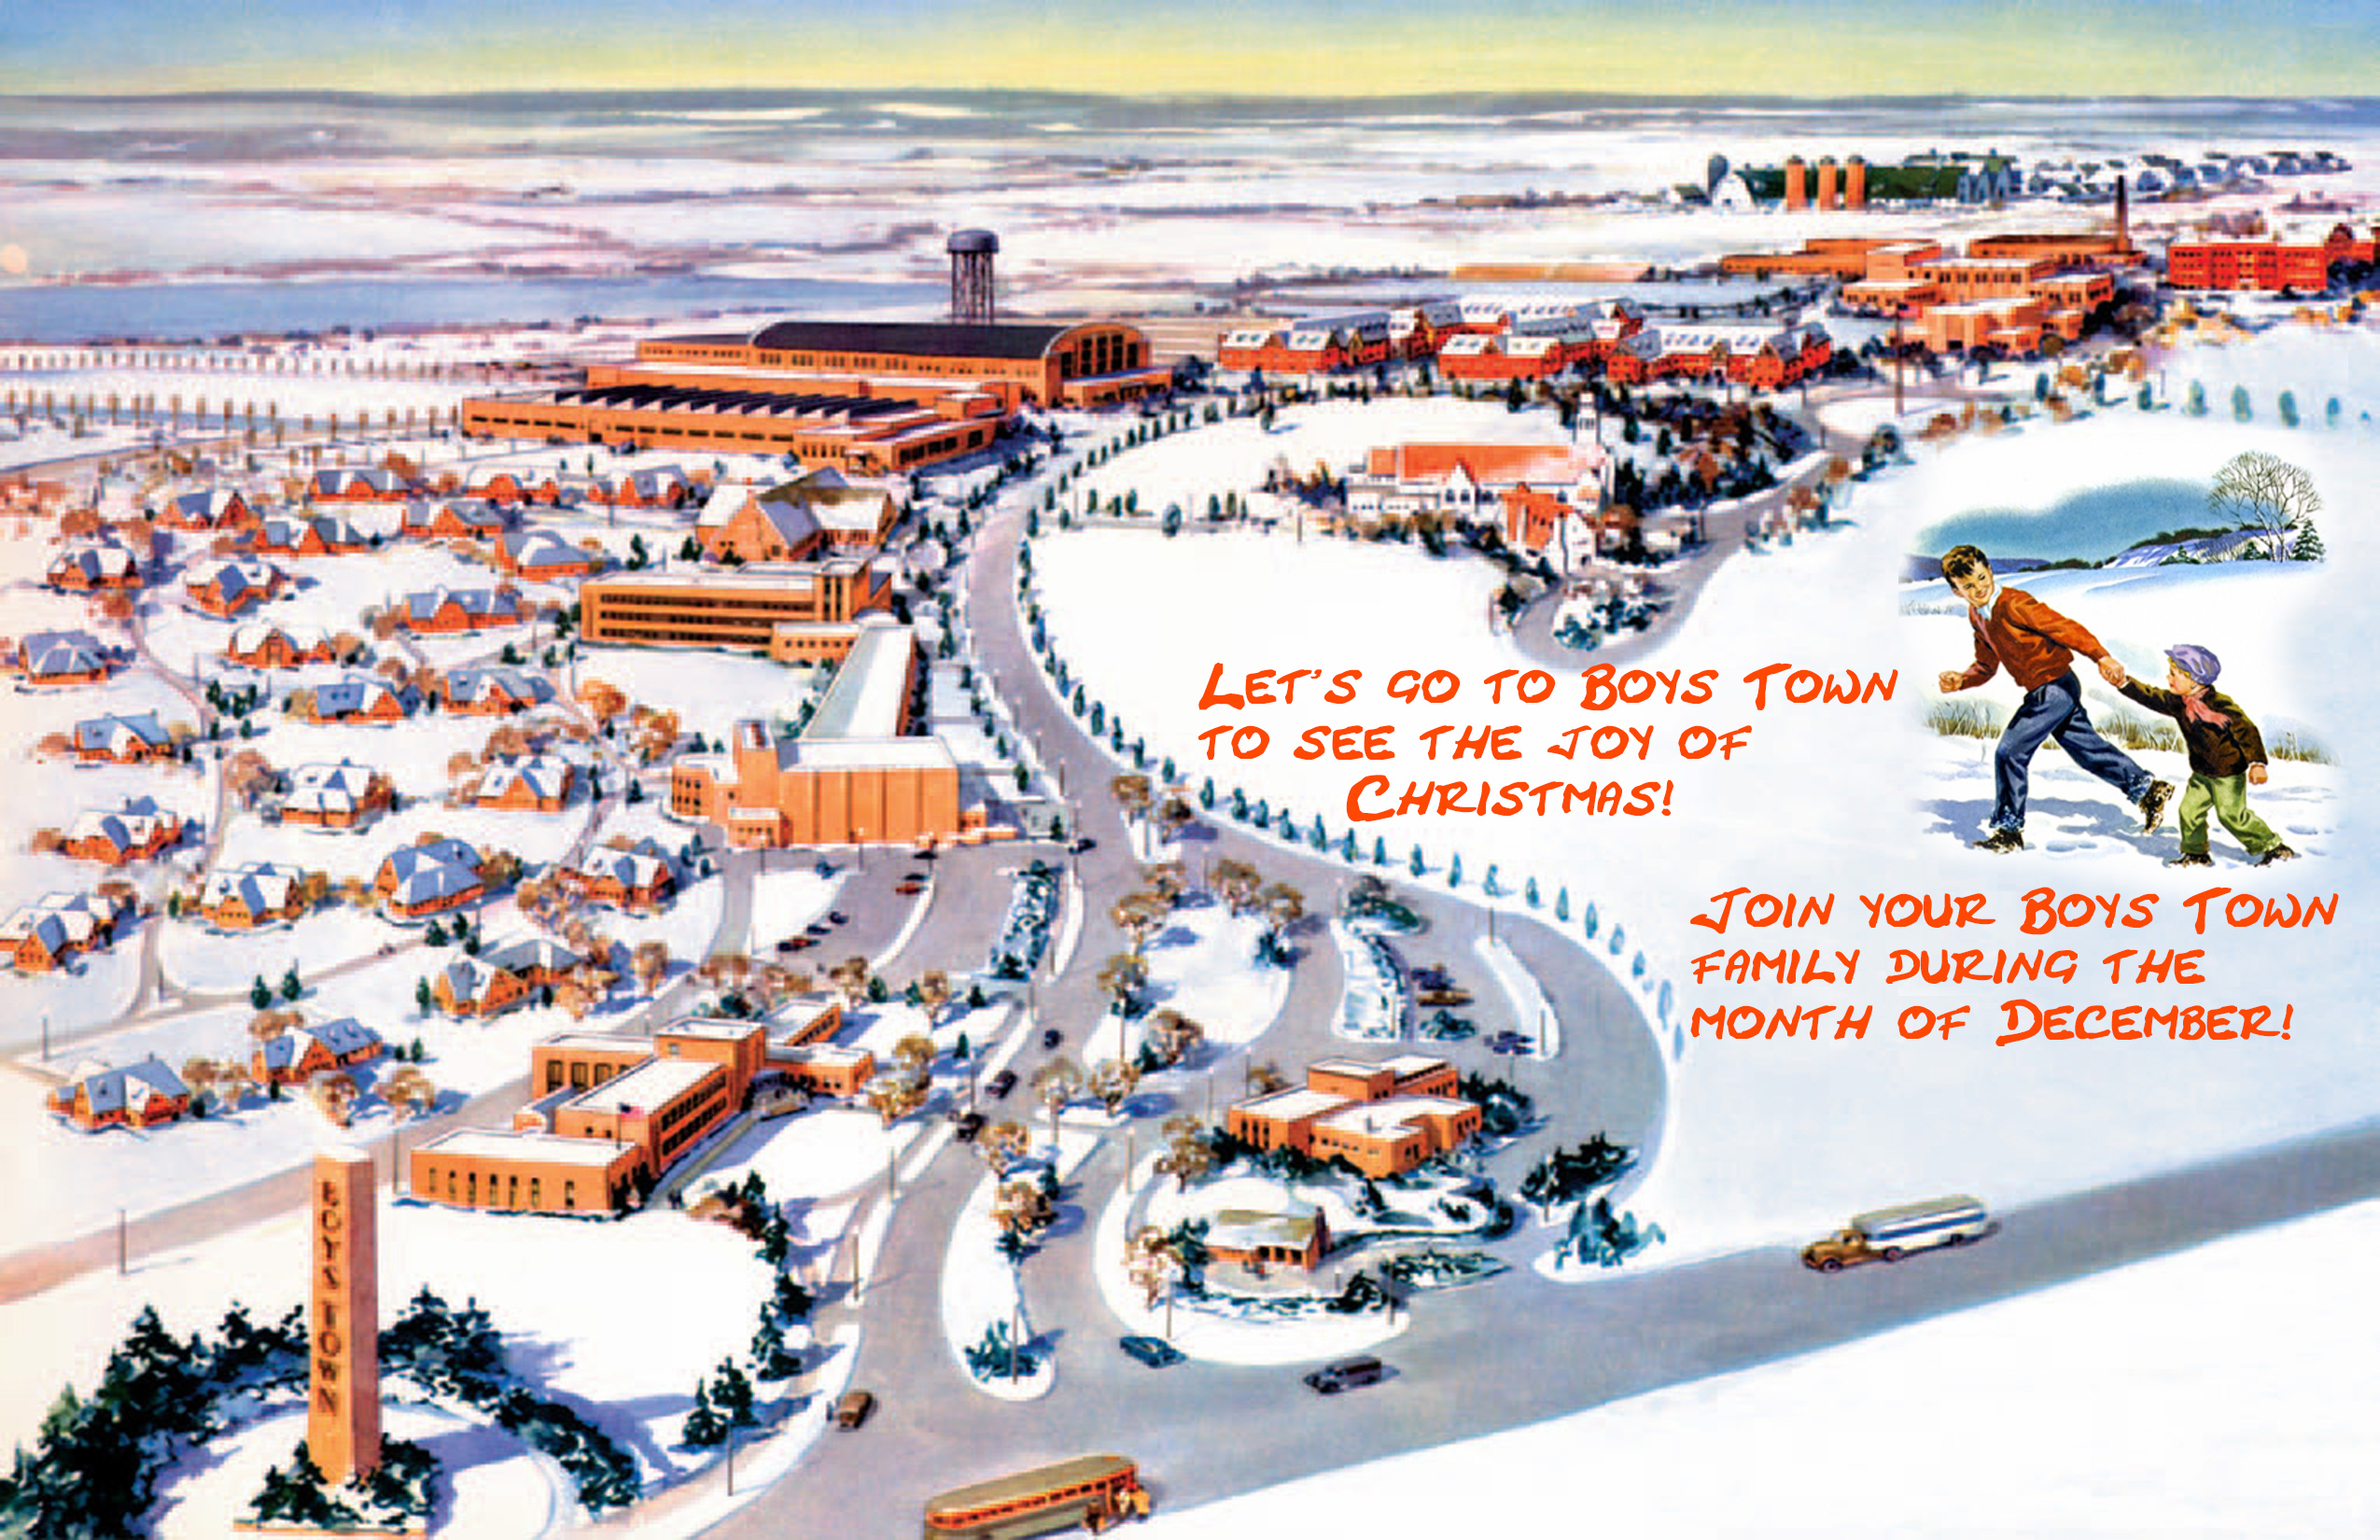 bt-1950s-aerial-winter-drawing-for-website-article-2019